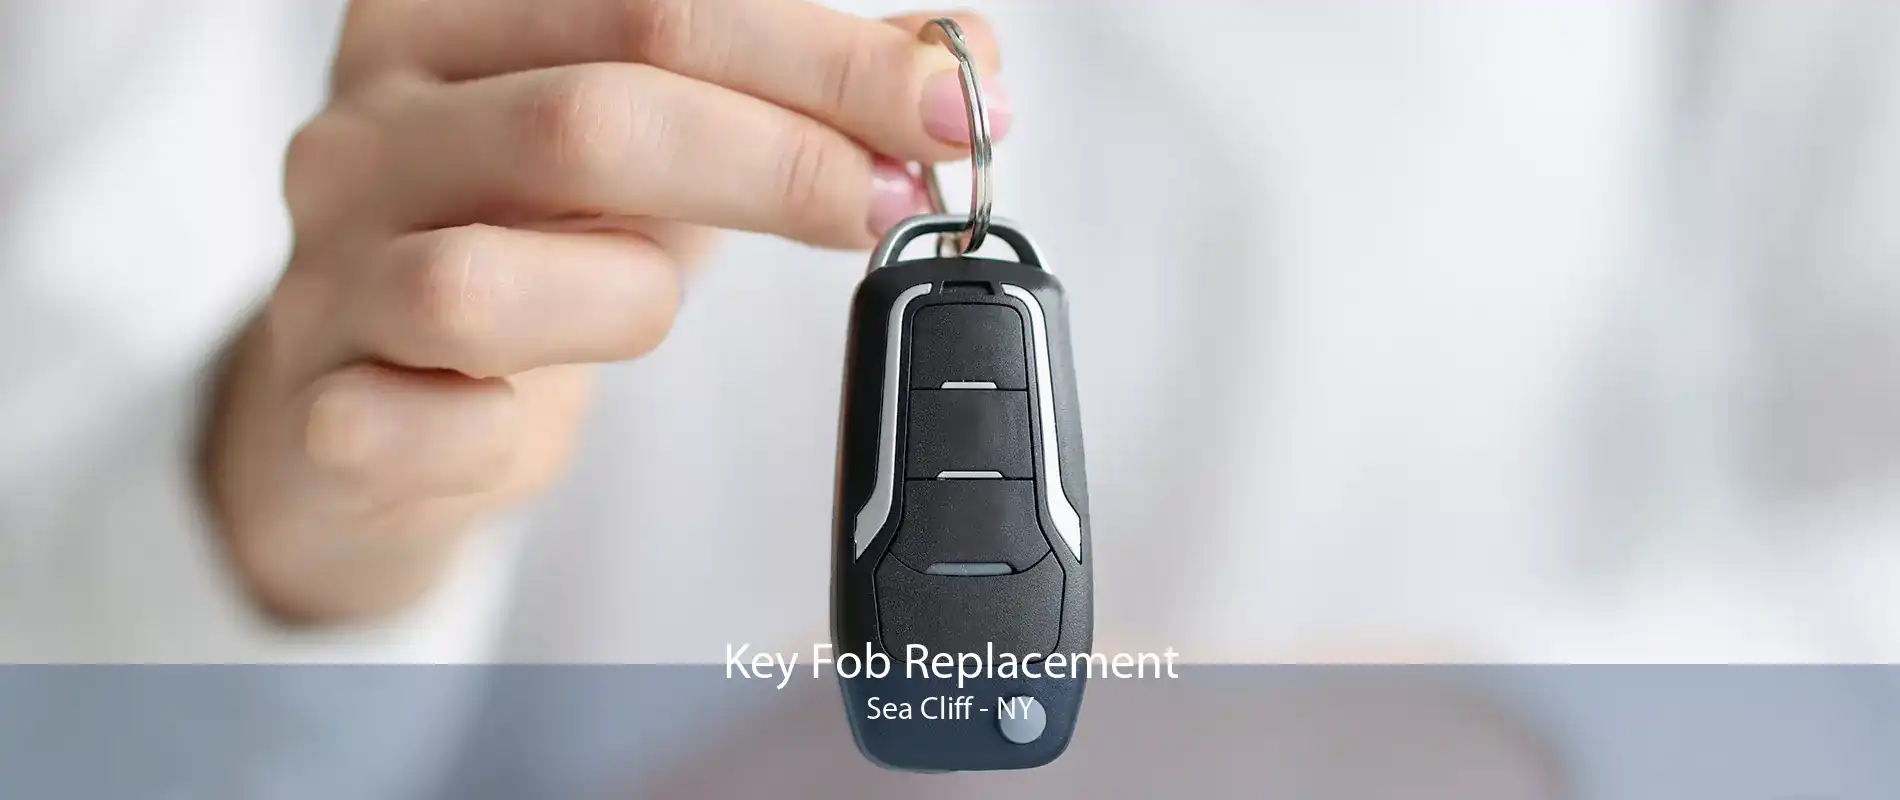 Key Fob Replacement Sea Cliff - NY